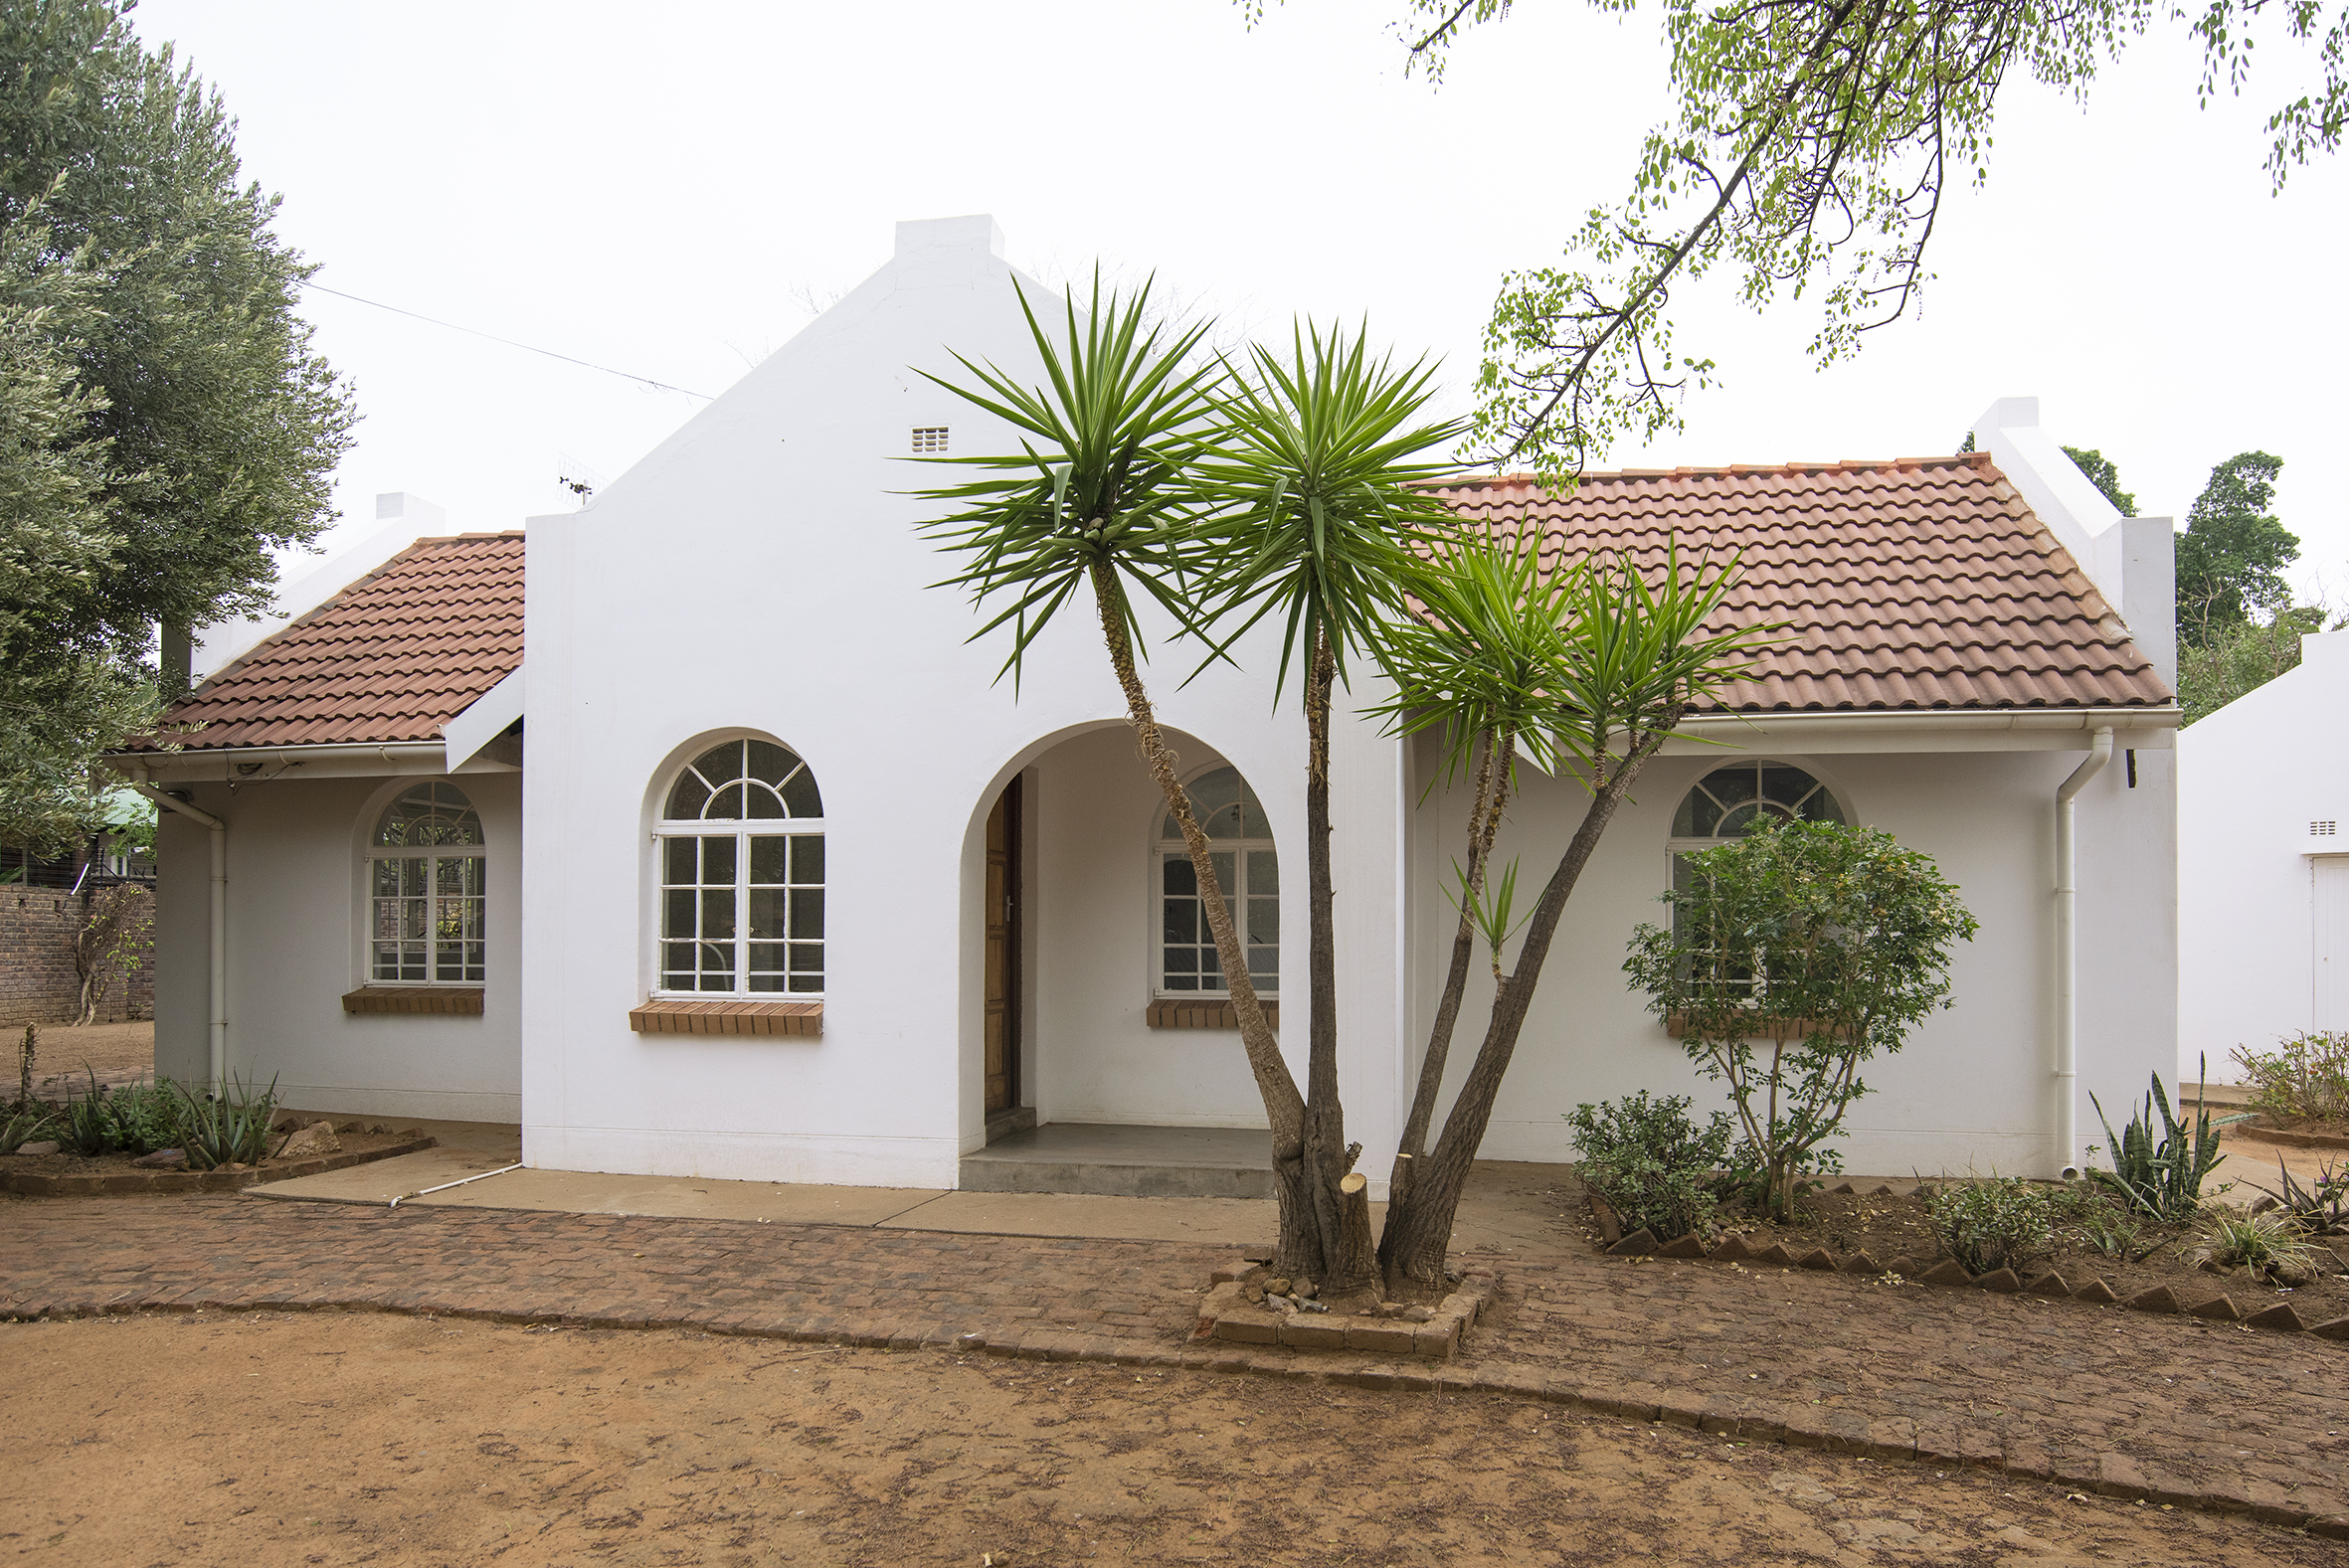 3 Bedroom House For Rent In Kgale View